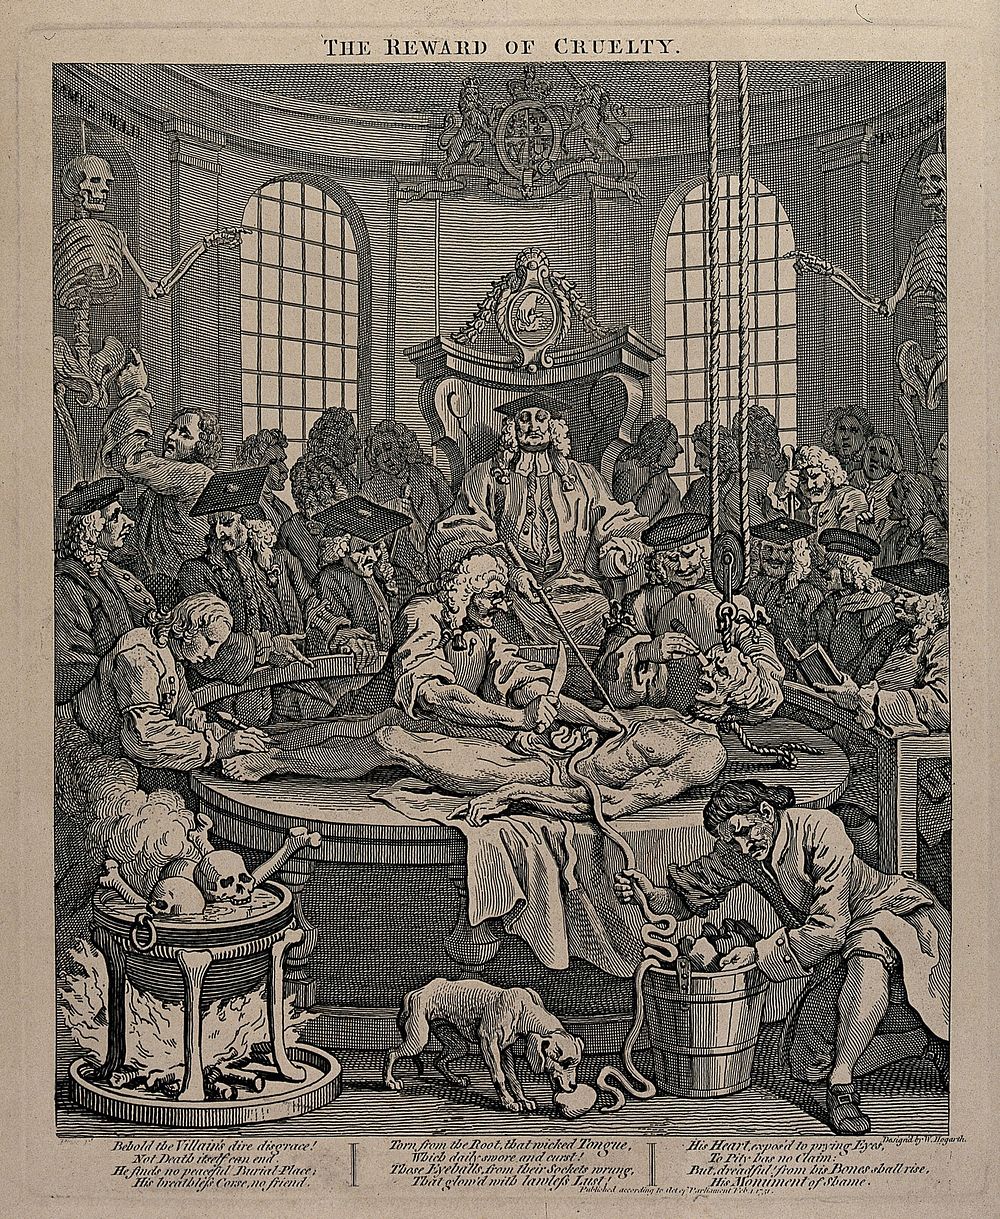 The dissection of the body of Tom Nero. Etching by W. Hogarth, 1751.